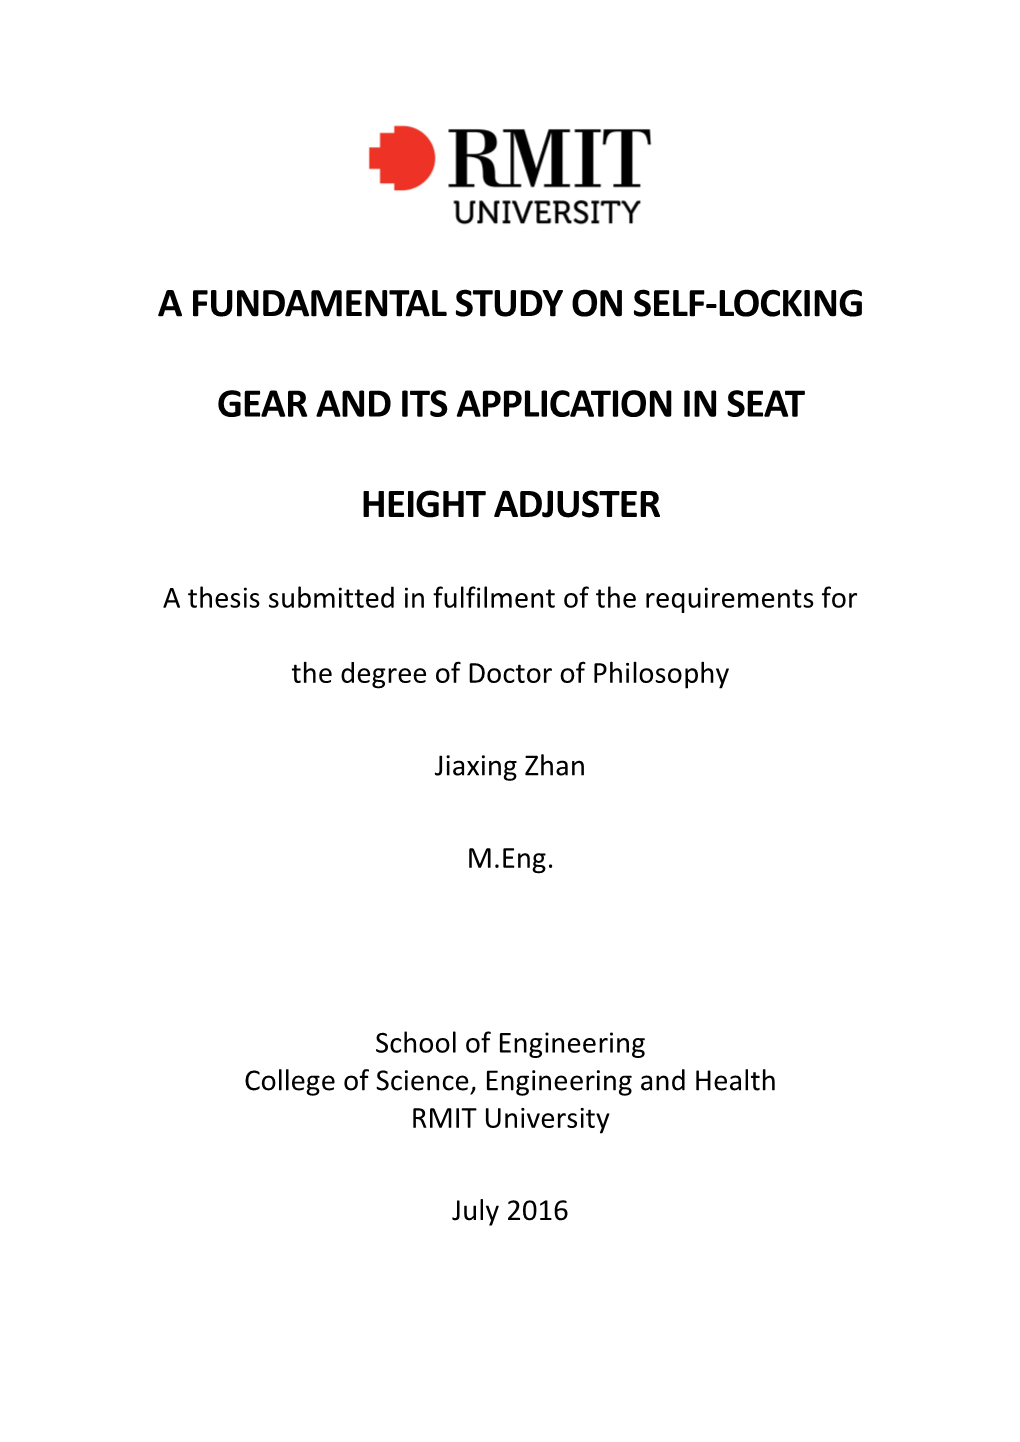 A Fundamental Study on Self-Locking Gear and Its Application in Seat